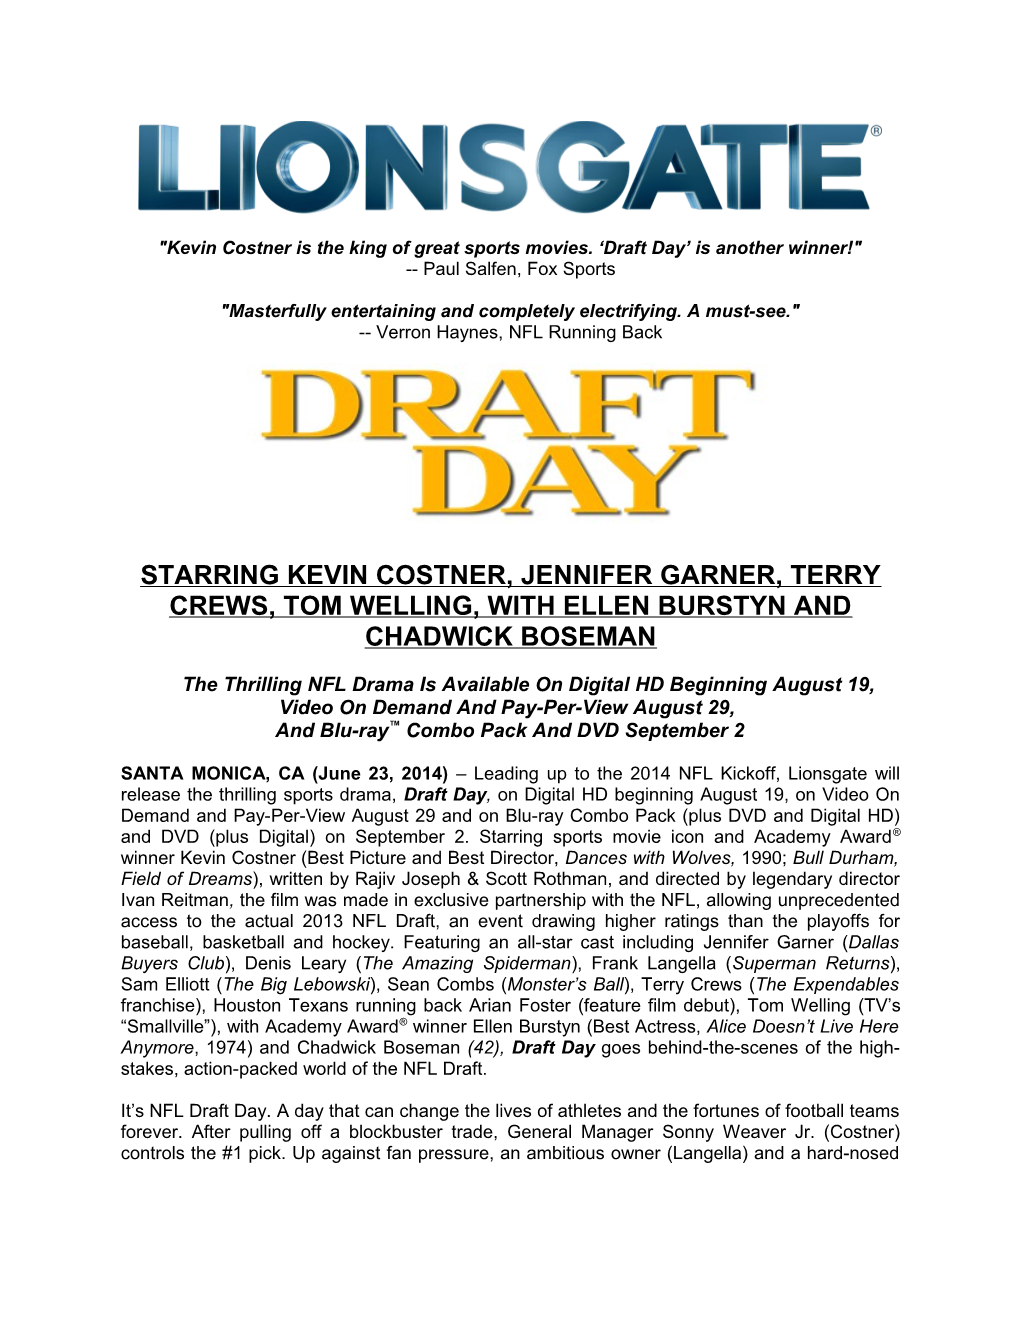 Kevin Costner Is the King of Great Sports Movies. Draft Day Is Another Winner!